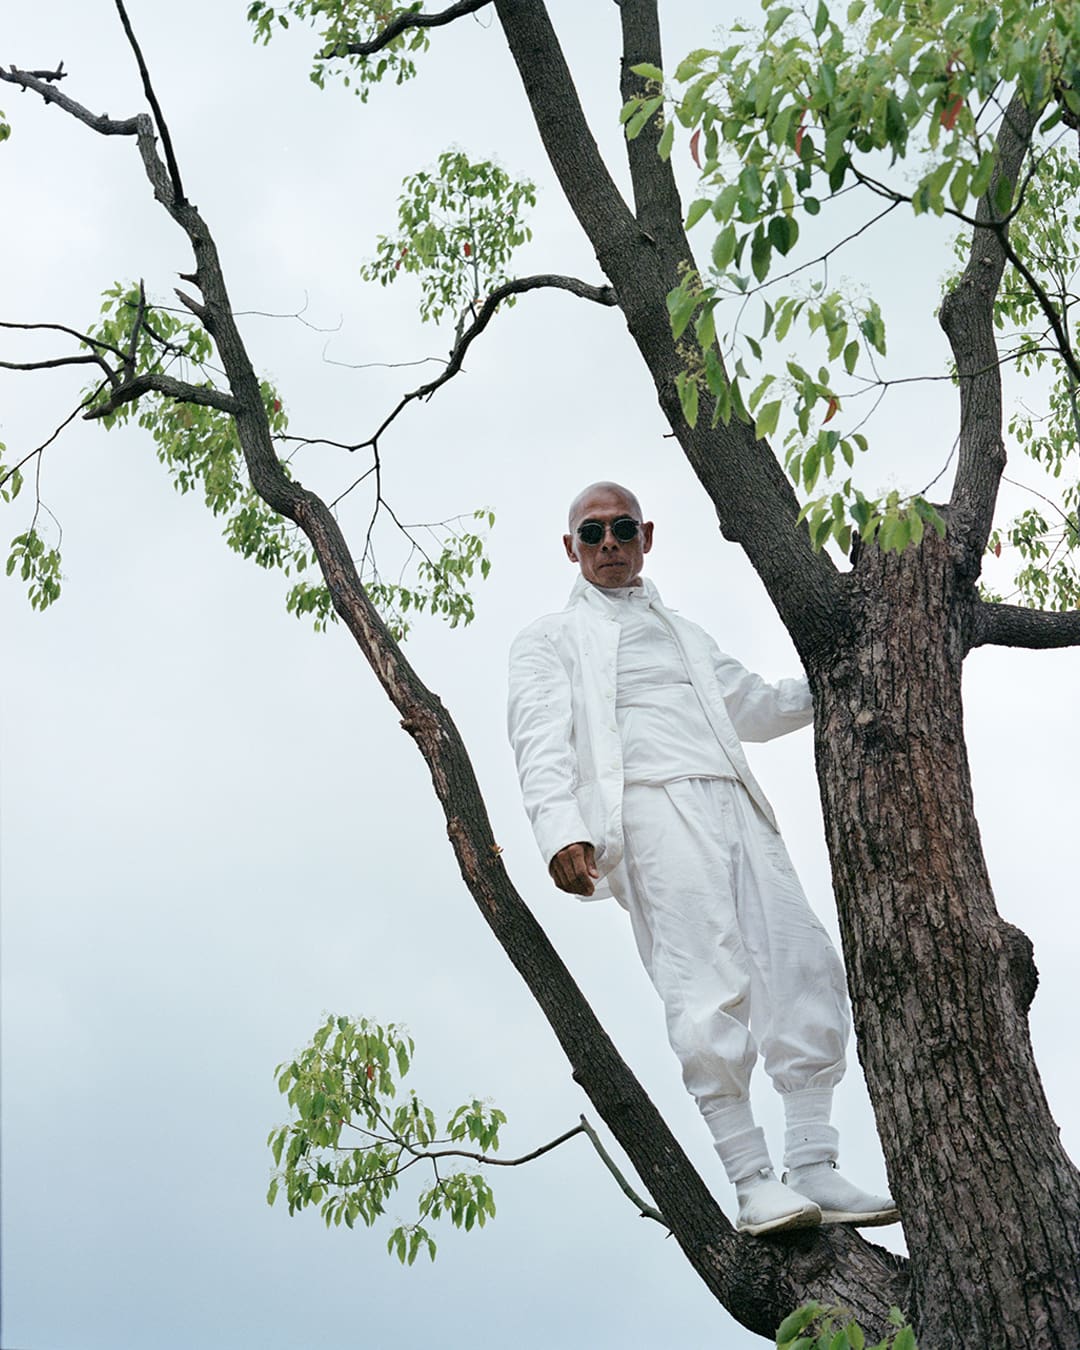 Chinese artist Zhang Huan in a white outfit standing in a tree